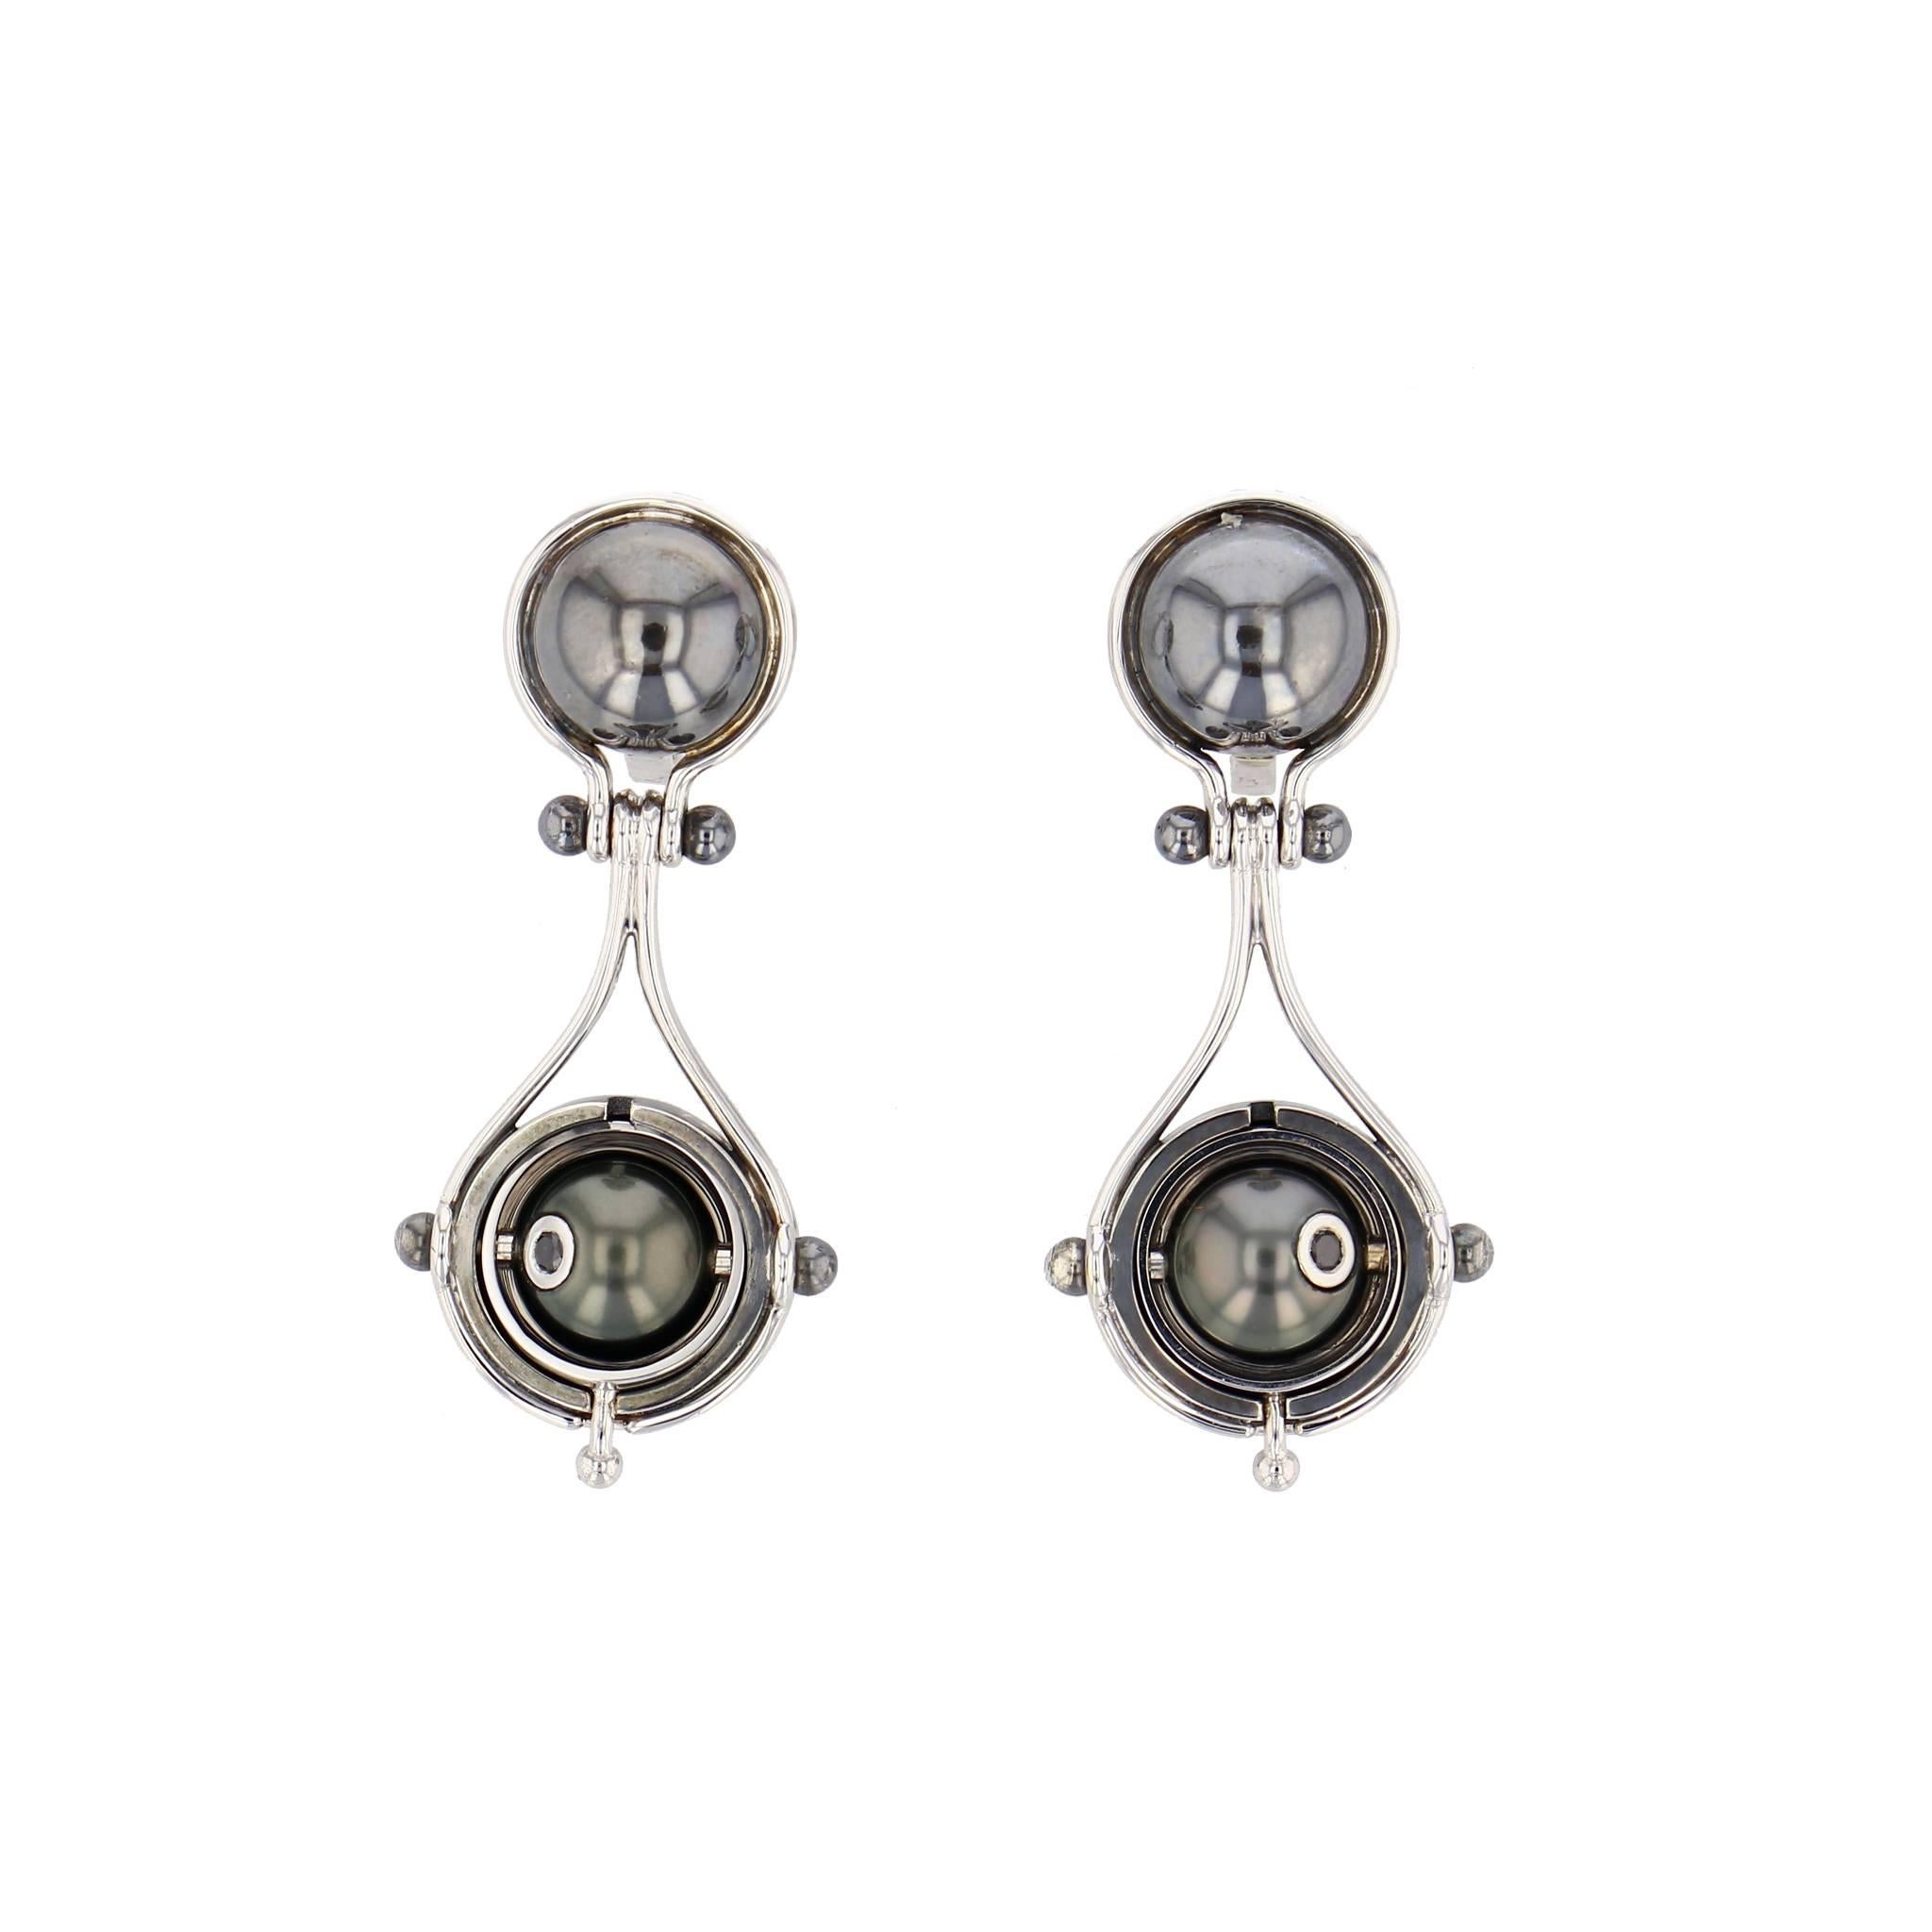 Earrings Pluton White Gold Silver Tahiti Pearl Diamonds

Dangly clip-on earrings comprising two white gold threads around a patinated silver globe level with the ear. This supports a patinated silver mobile structure, on which a rotating white gold